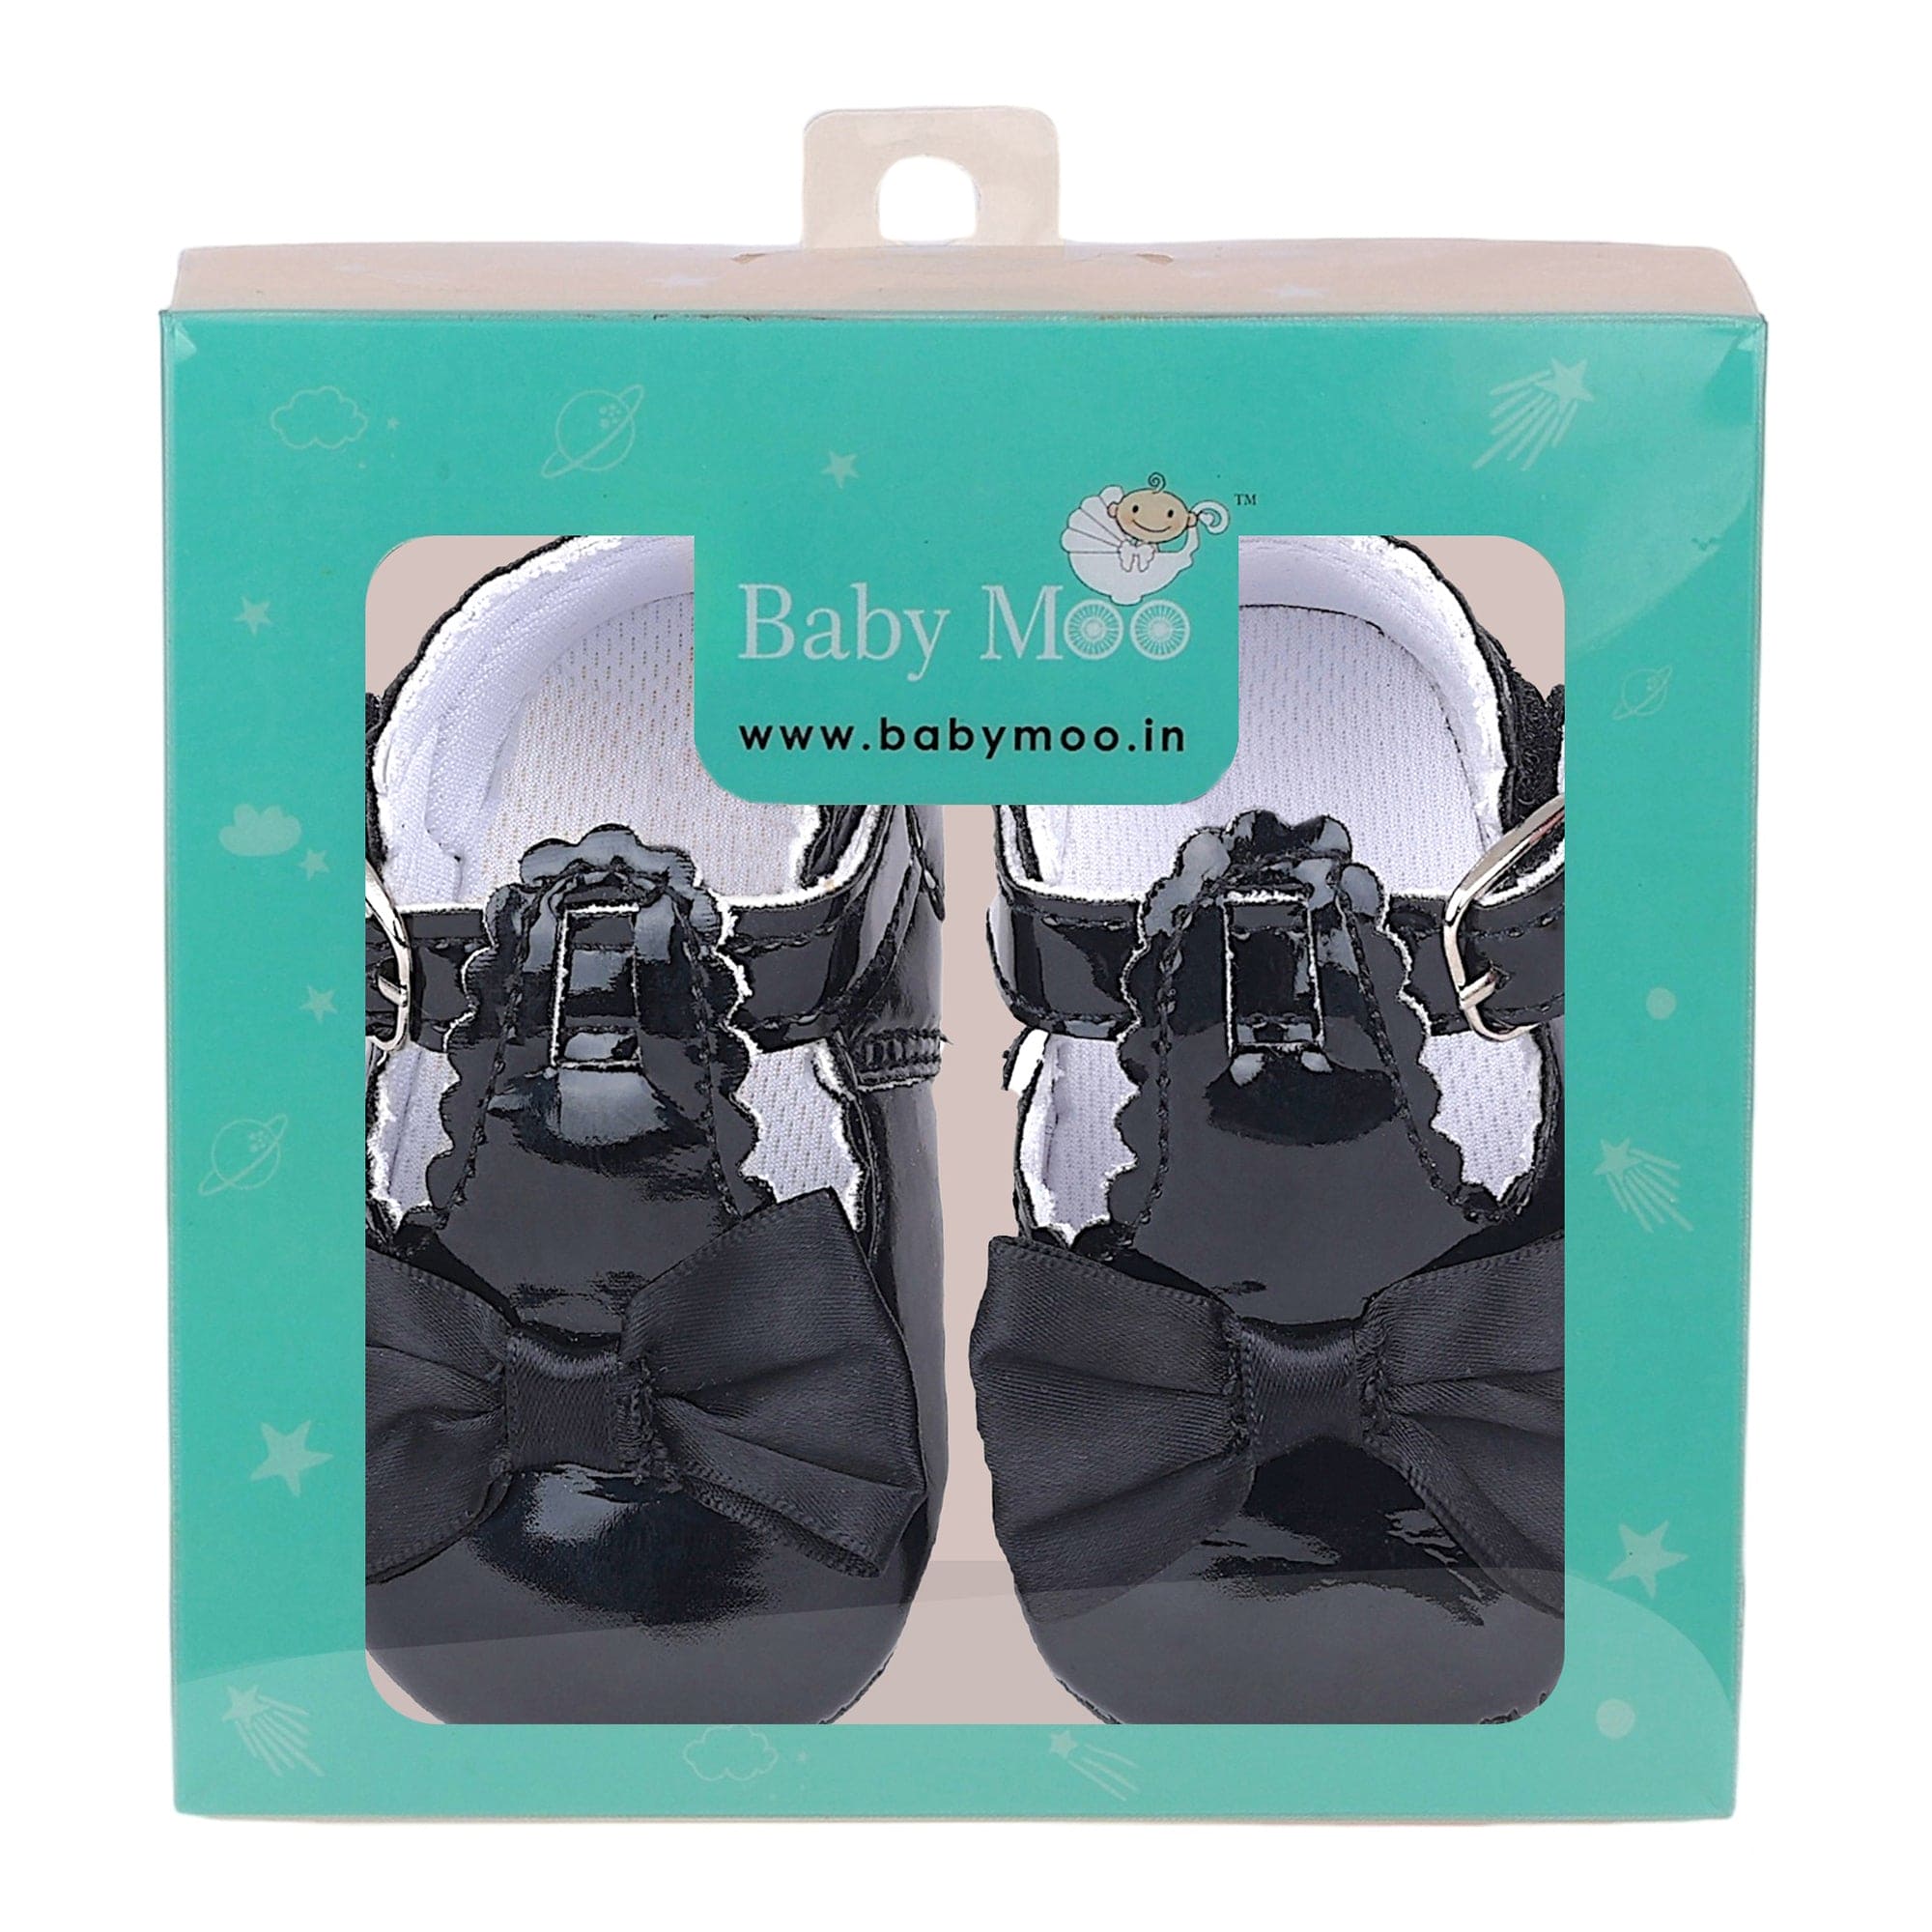 Baby Moo Mary Jane Bow Patent Leather Anti-Skid Ballerina Booties - Black